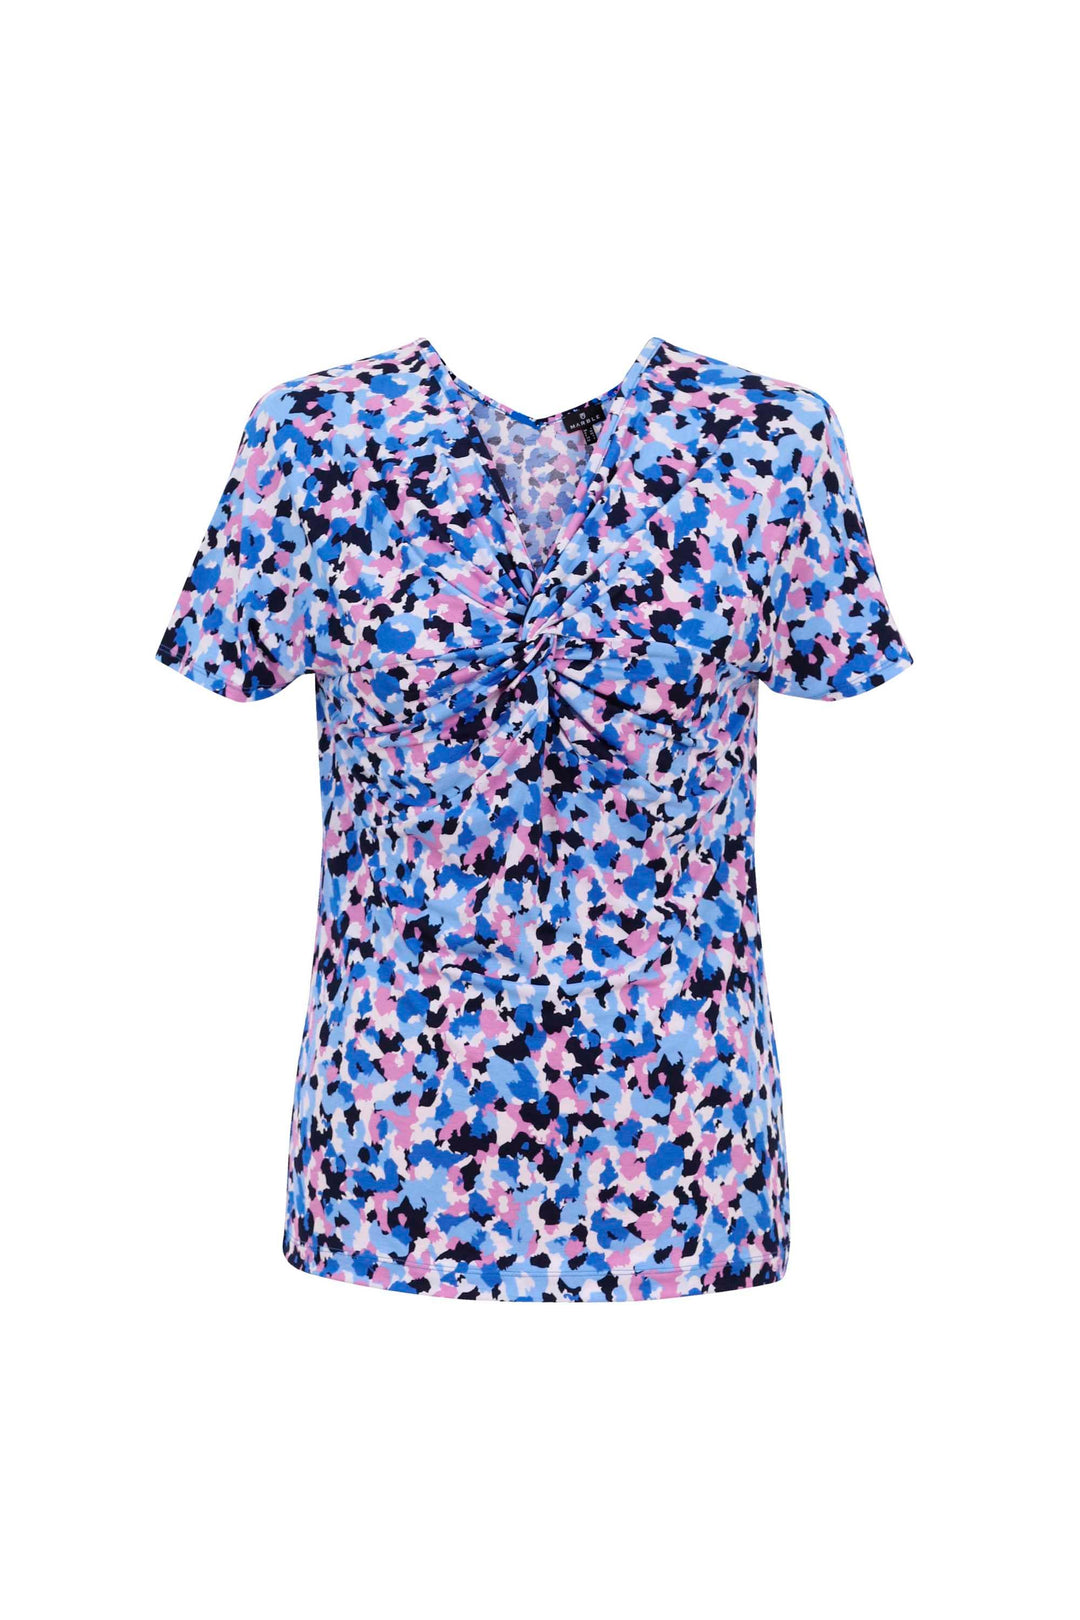 Marble Top Style 6979-141 - Top Multi Coloured, New, SS23, T-Shirt, Top ginasmartboutique